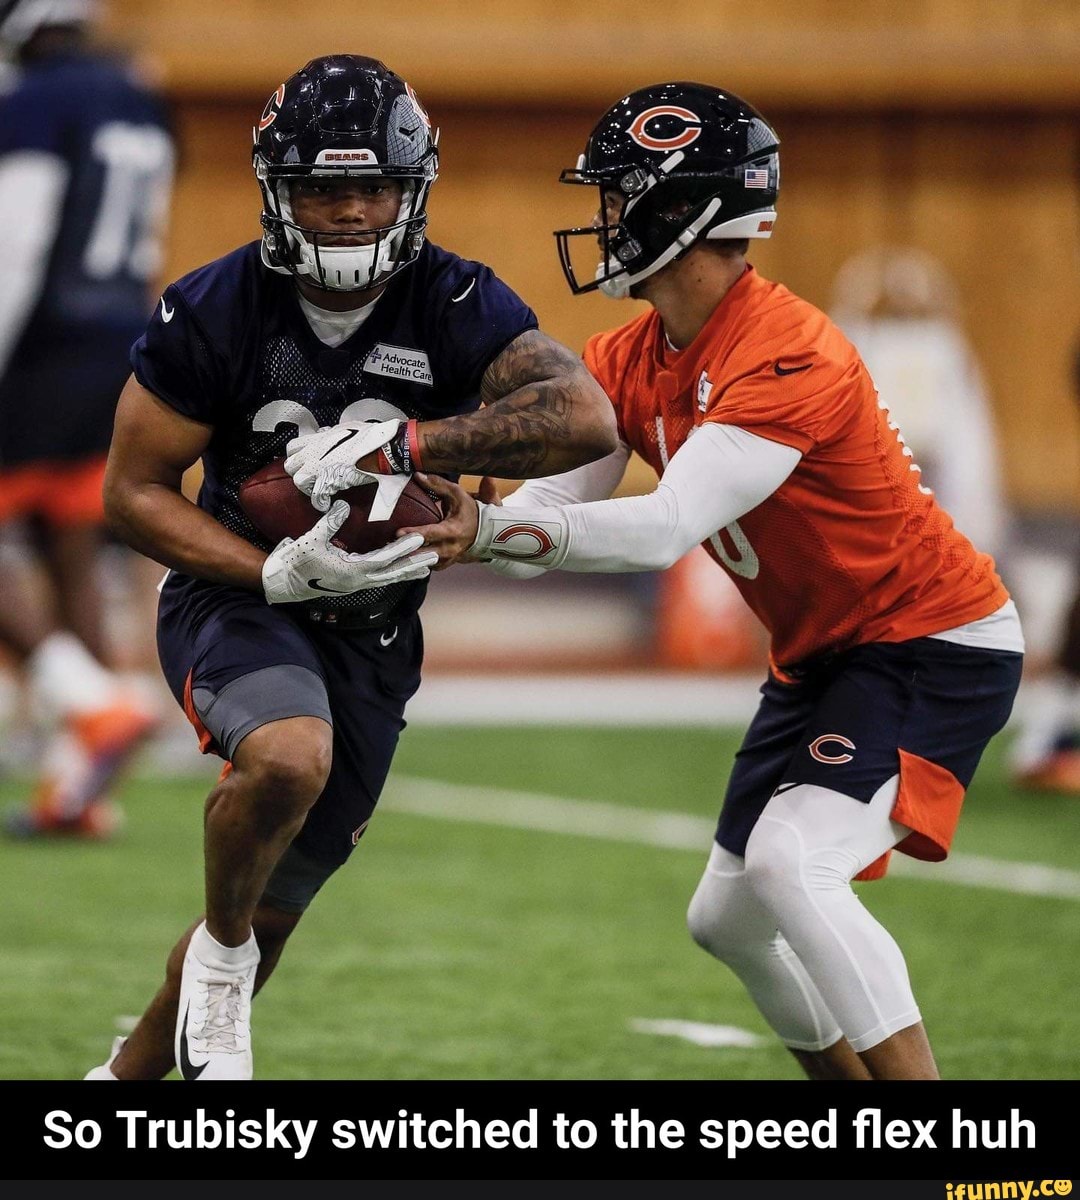 So Trubisky switched to the speed flex huh - So Trubisky switched to the sp...